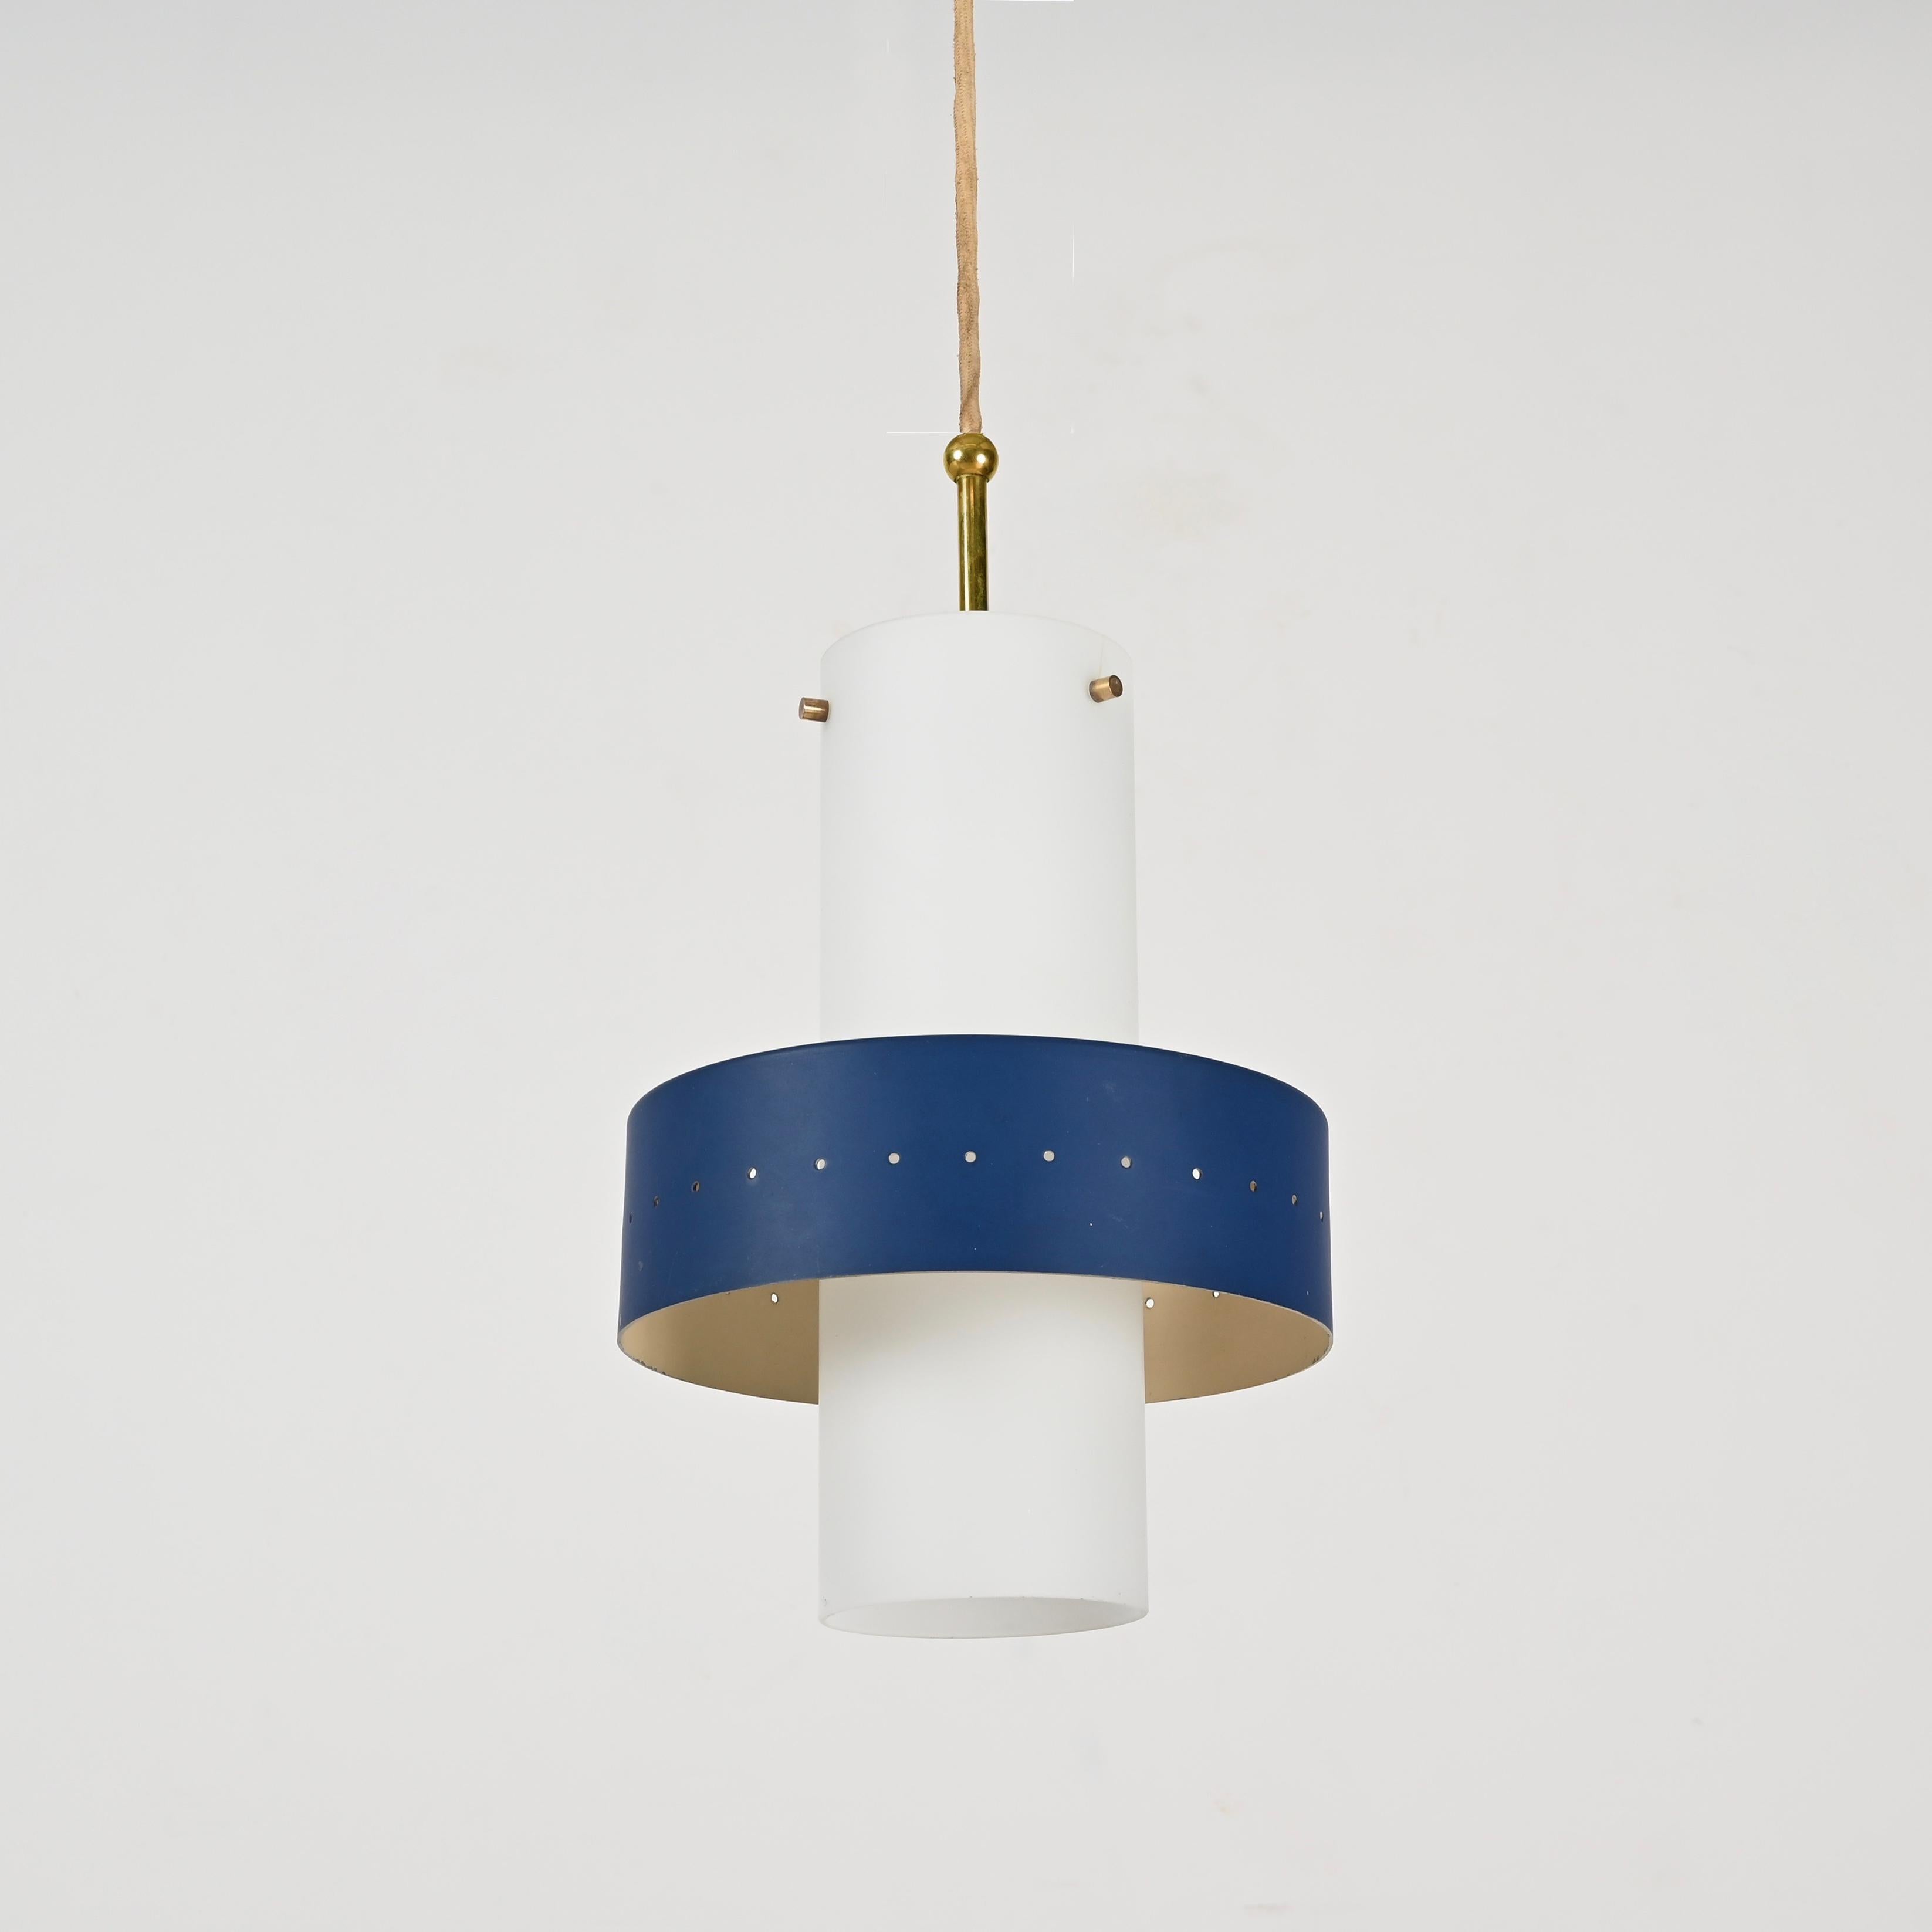 Stunning Mid-Century pendant lamp in opal glass and blue enameled metal. This incredibly elegant pendant was designed by Stilnovo in Italy during the 1950s.

The round lines are the protagonists of this beautiful ceiling lamp, the contrast between